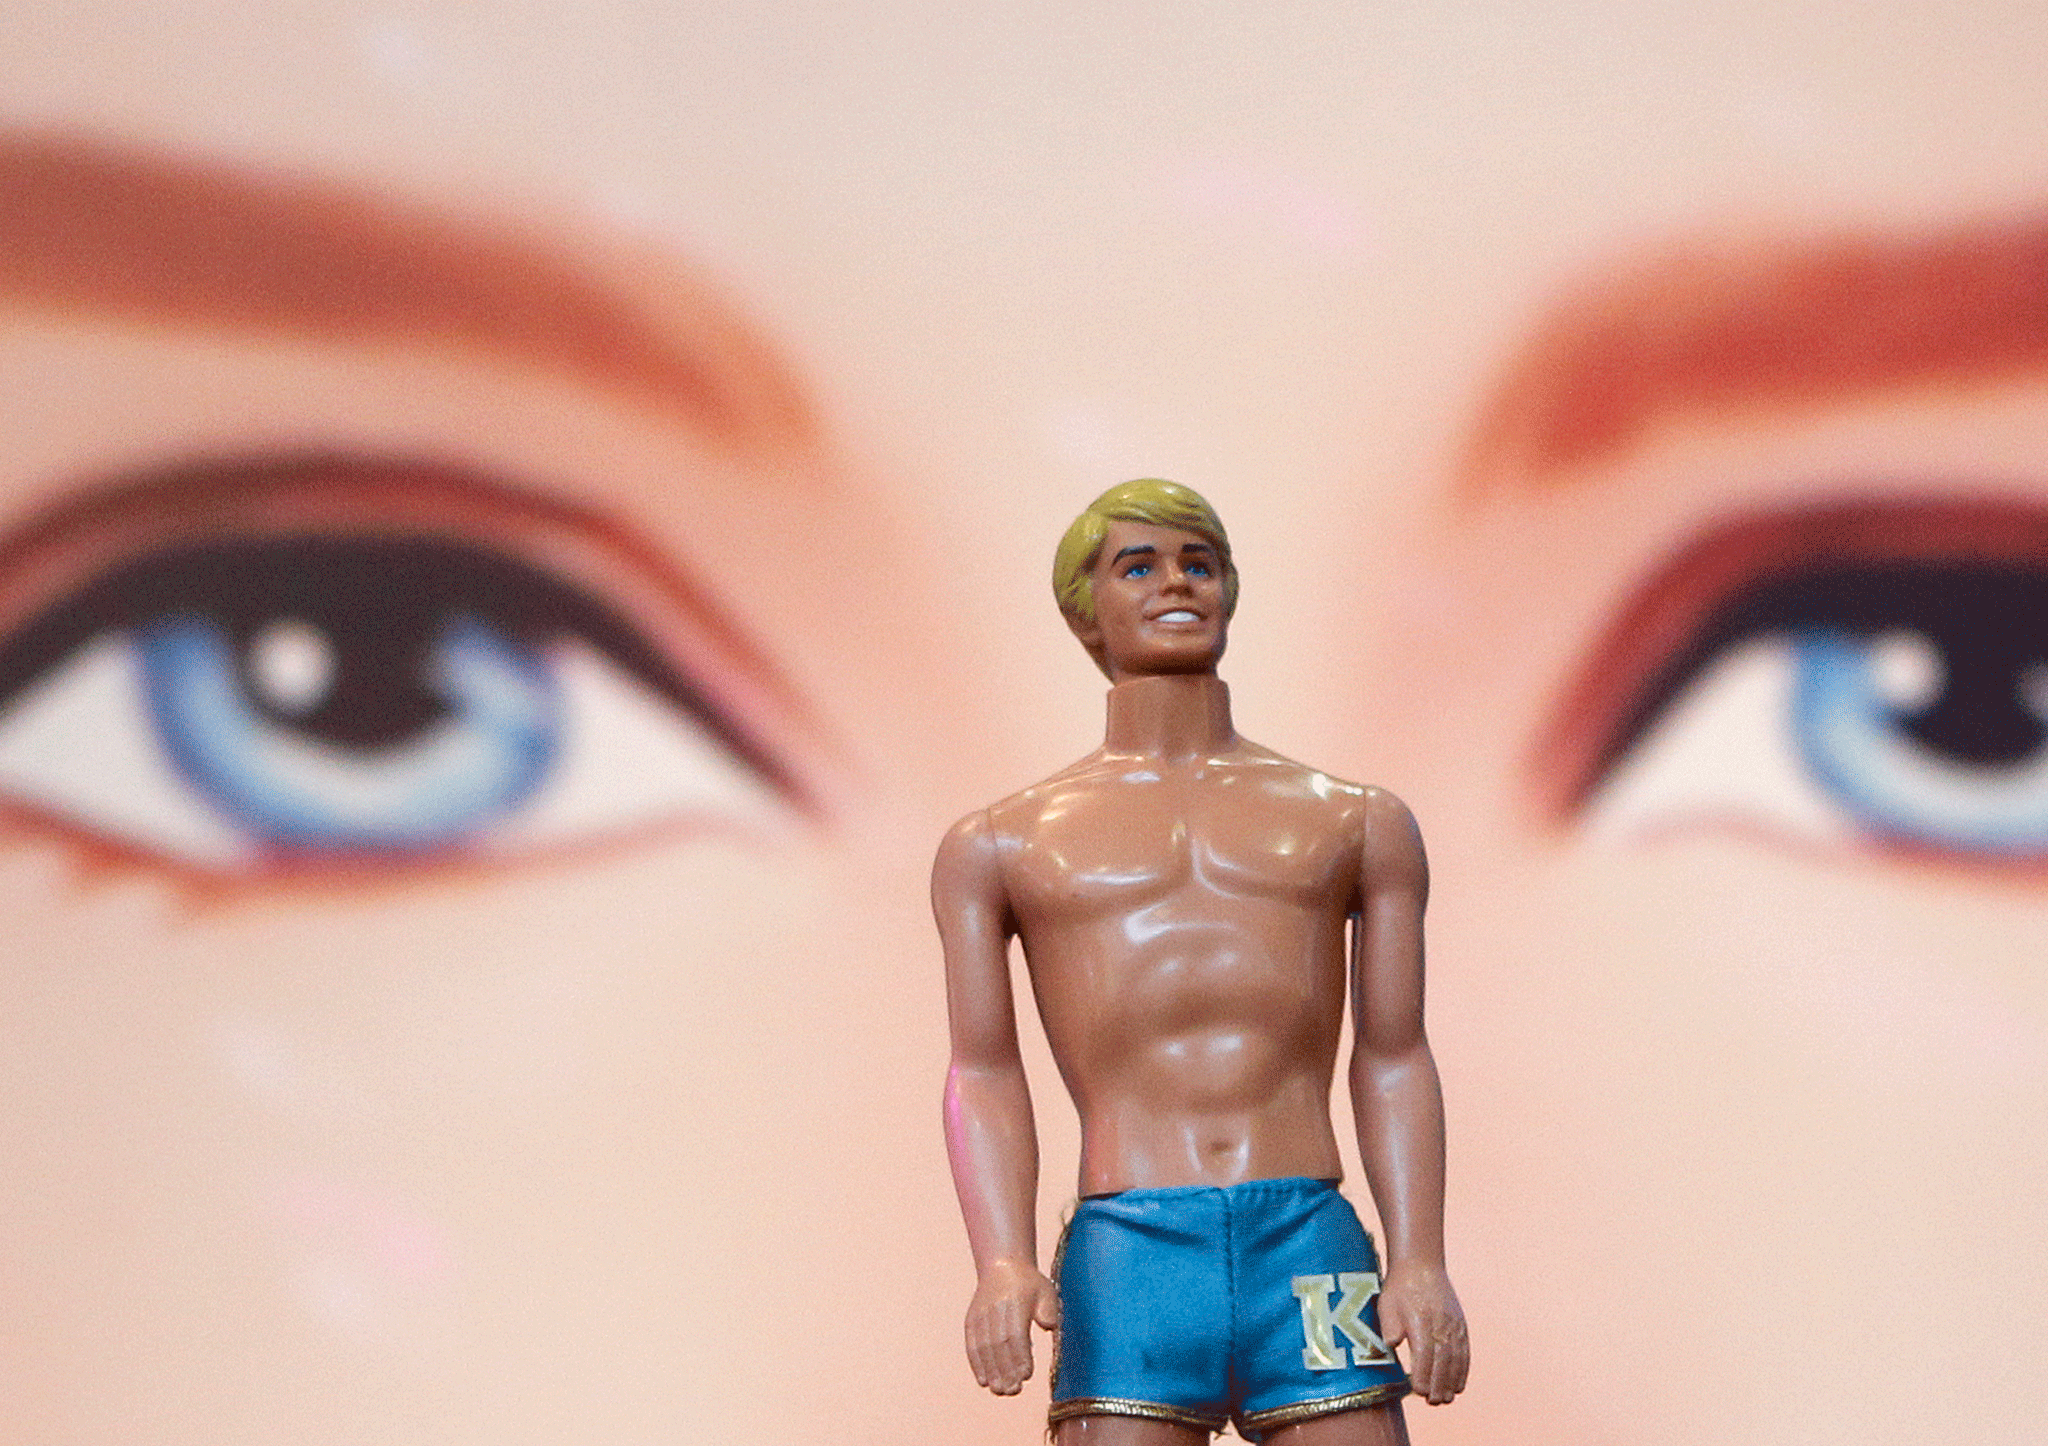 Ken doll gets makeover, now available in seven different skin tones